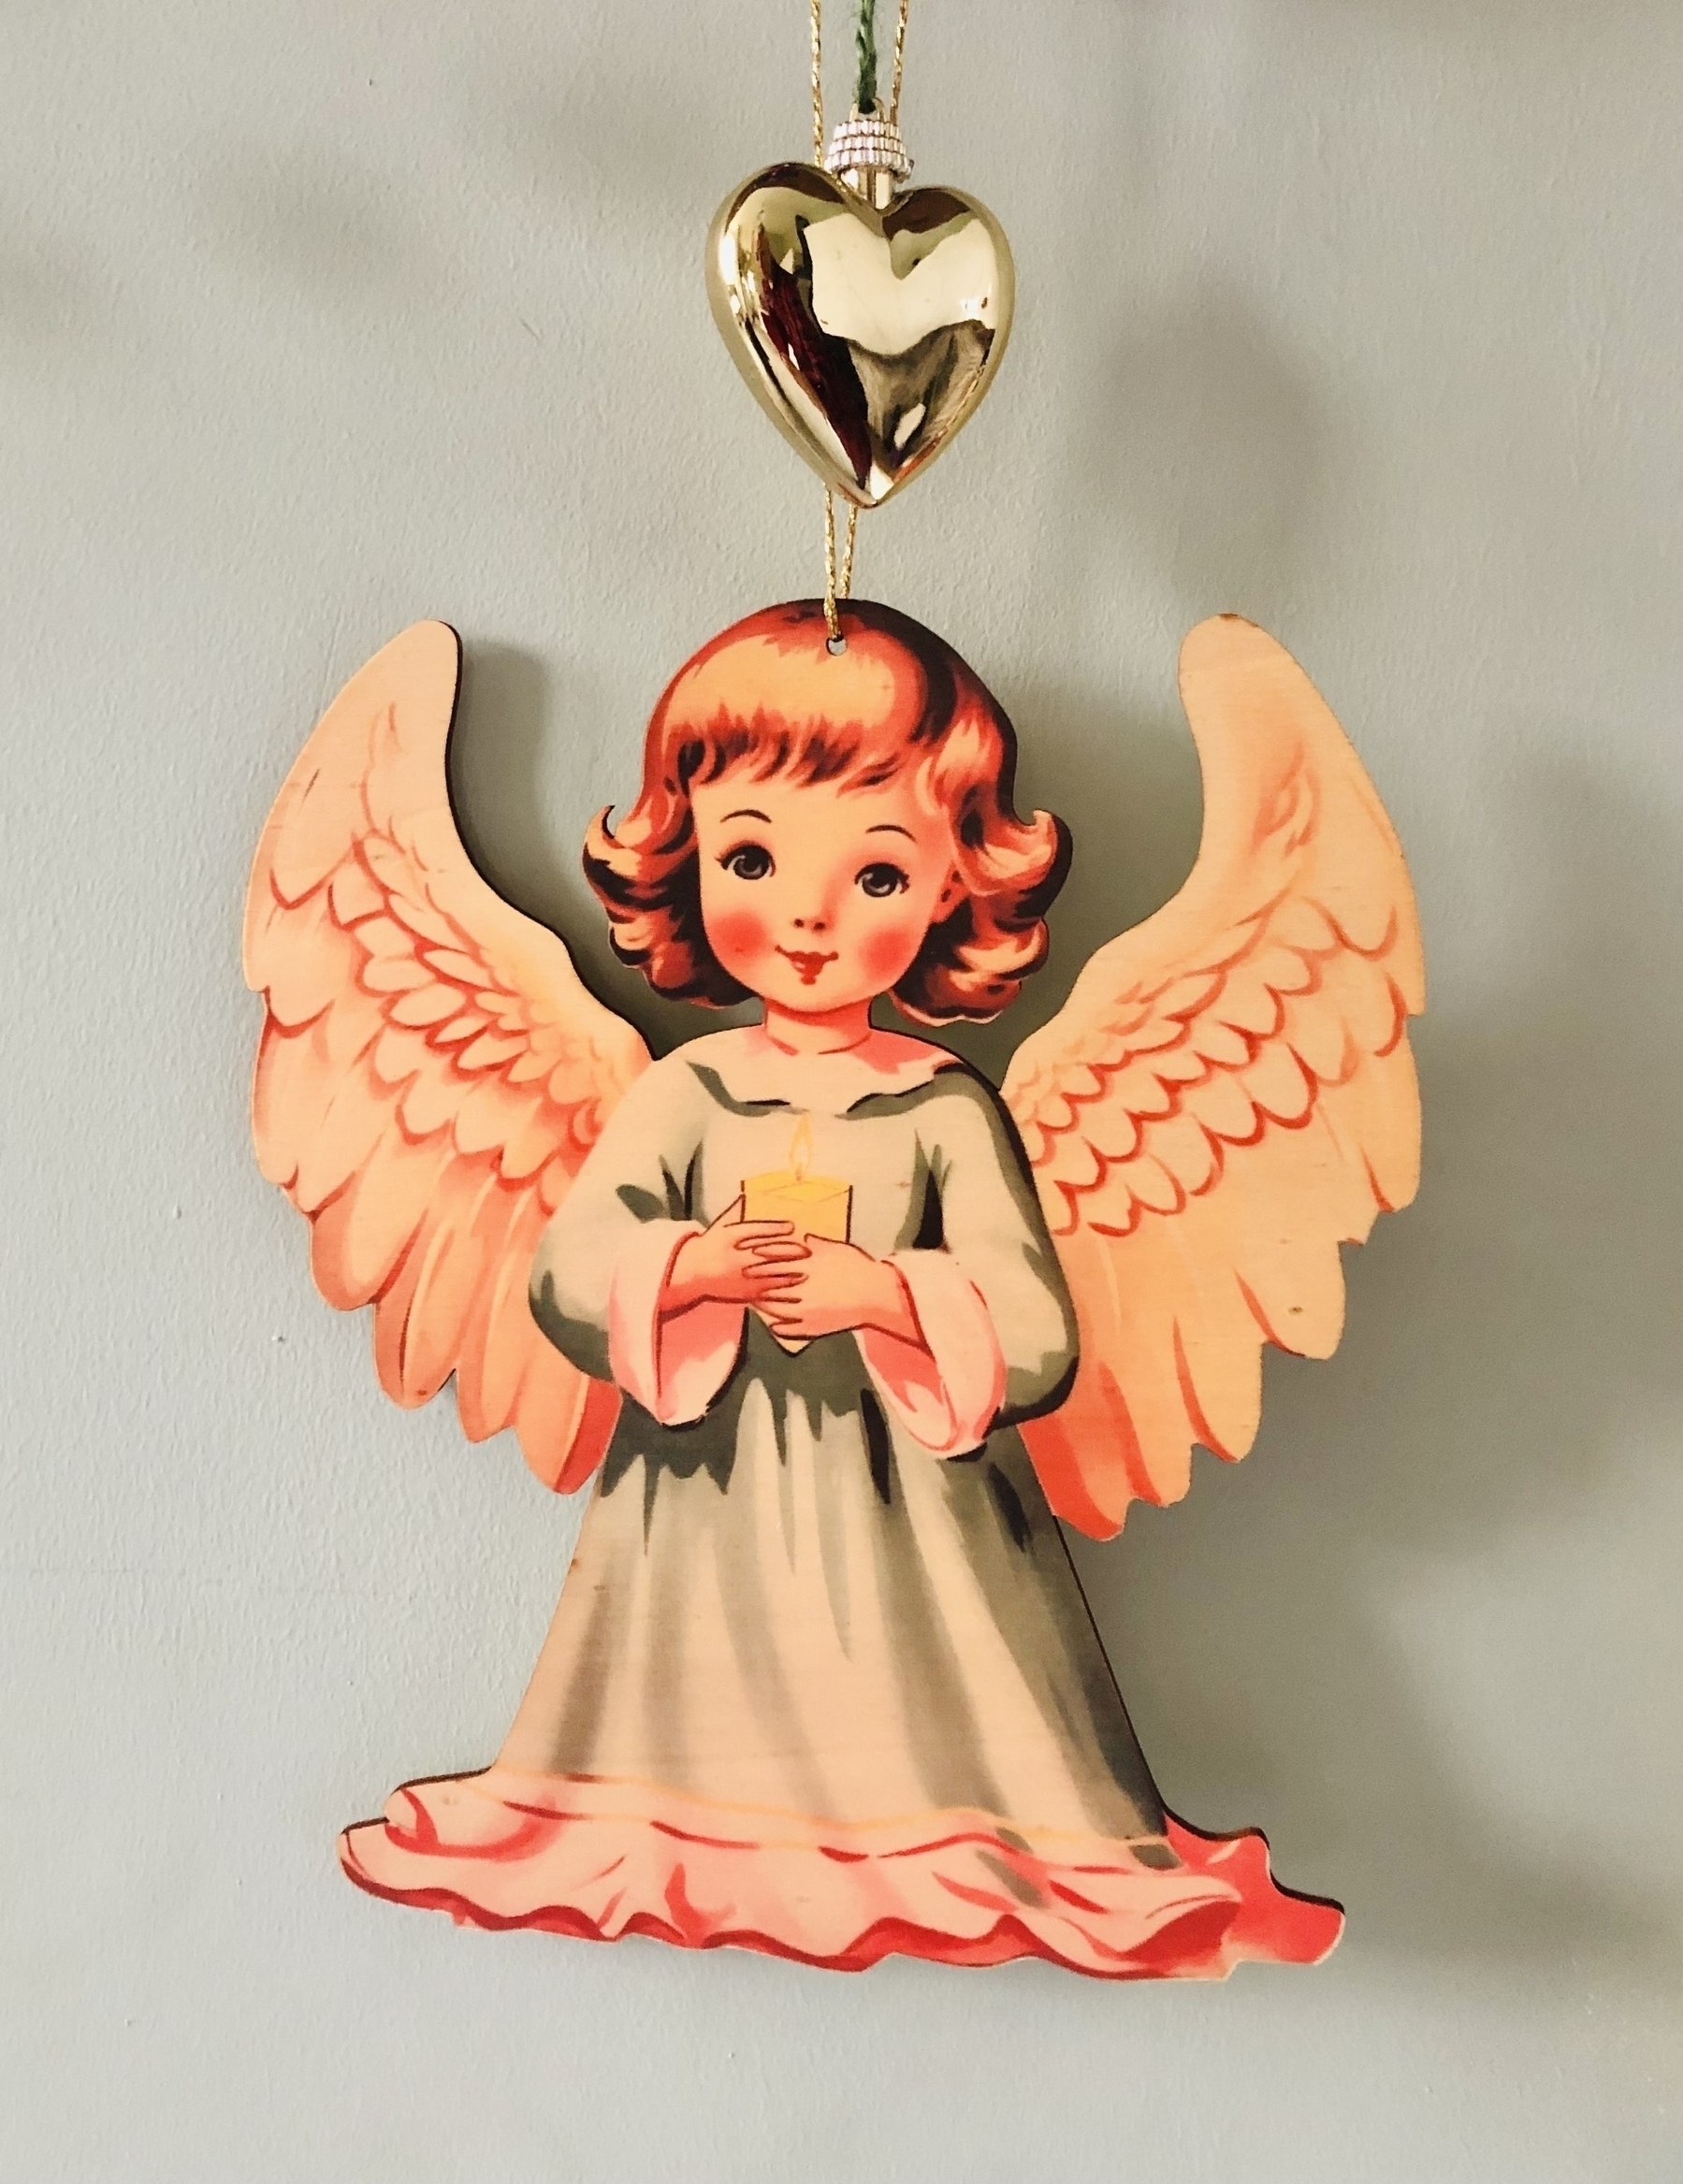 Sweet decoration of an angel holding a candle